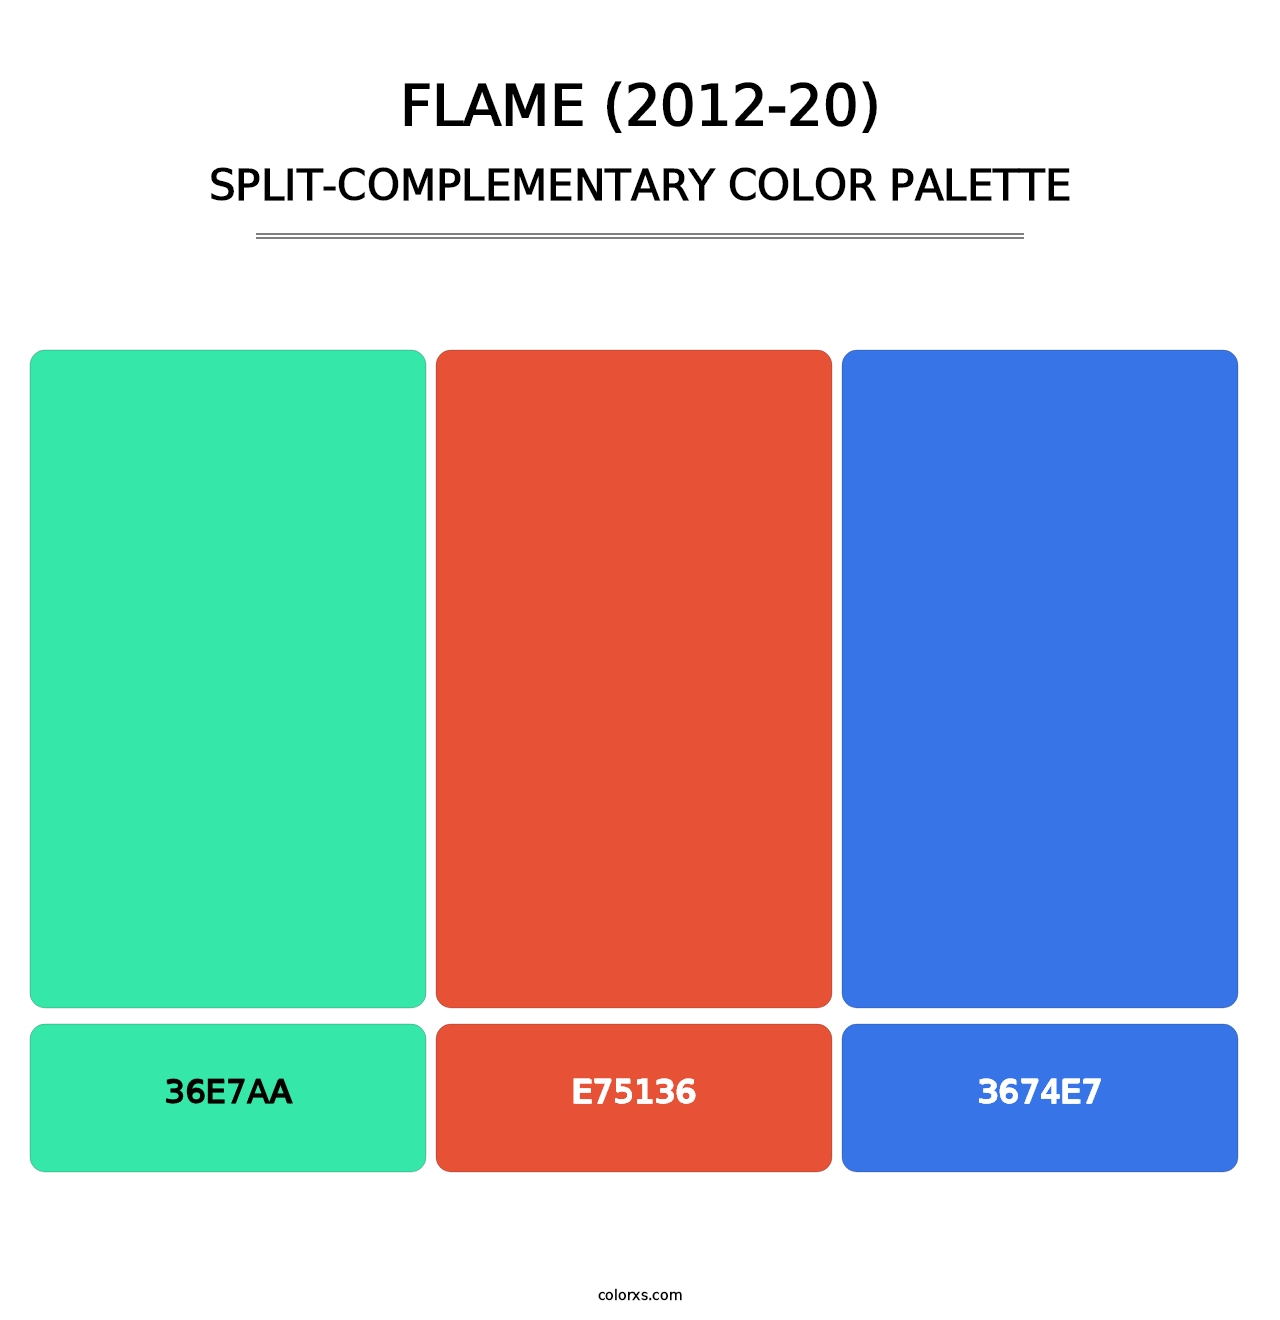 Flame (2012-20) - Split-Complementary Color Palette